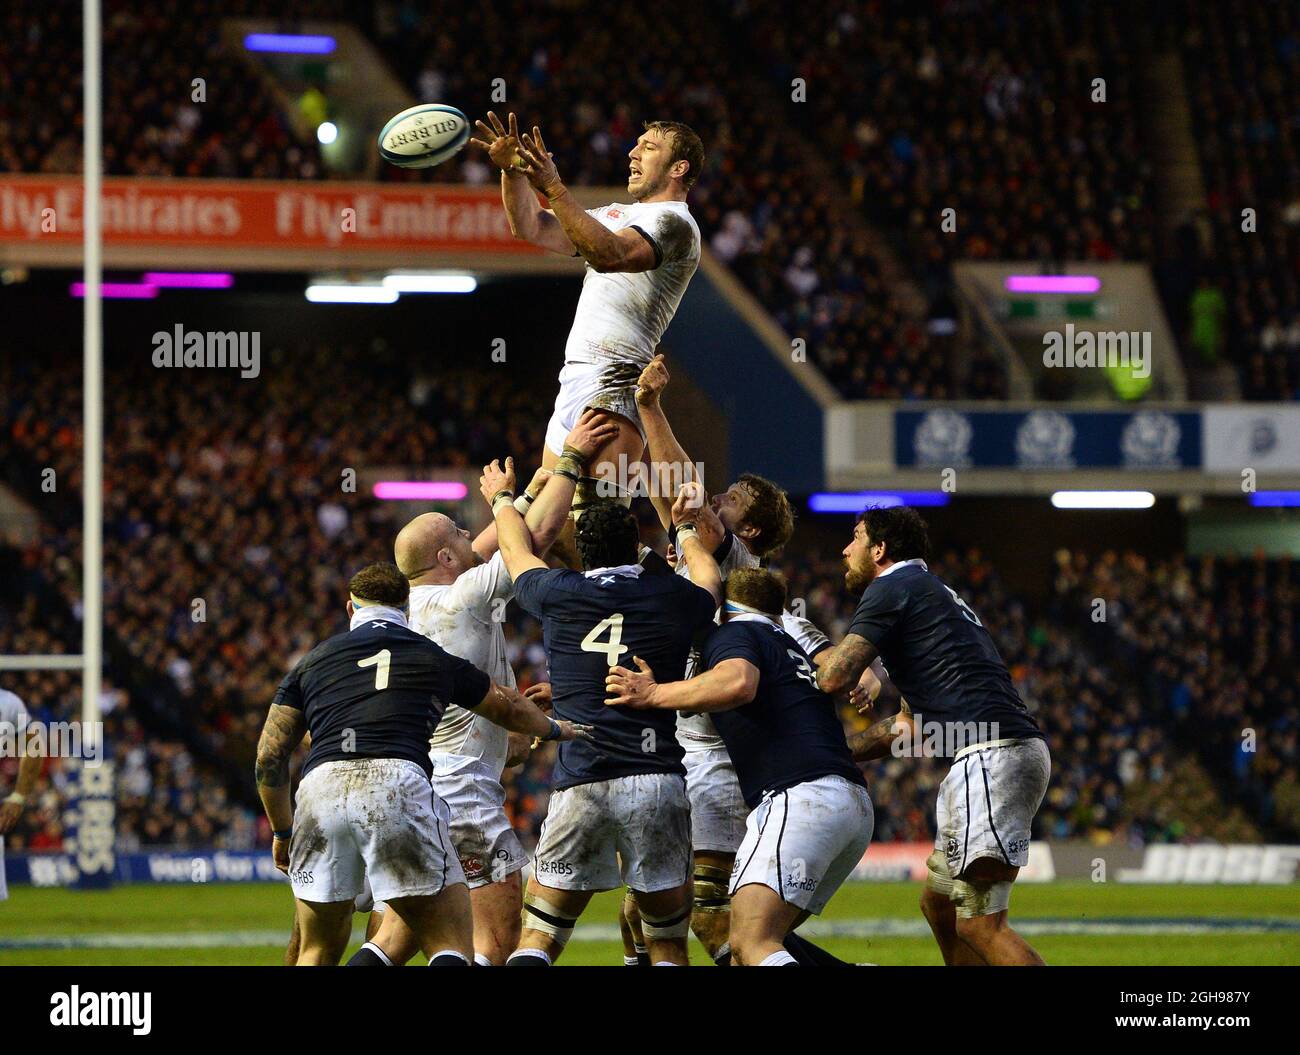 Chris Robshaw of England wins the line out during the RBS 6Nations match between Scotland and England at Murrayfield Stadium, Edinburgh on February 8, 2014. Stock Photo